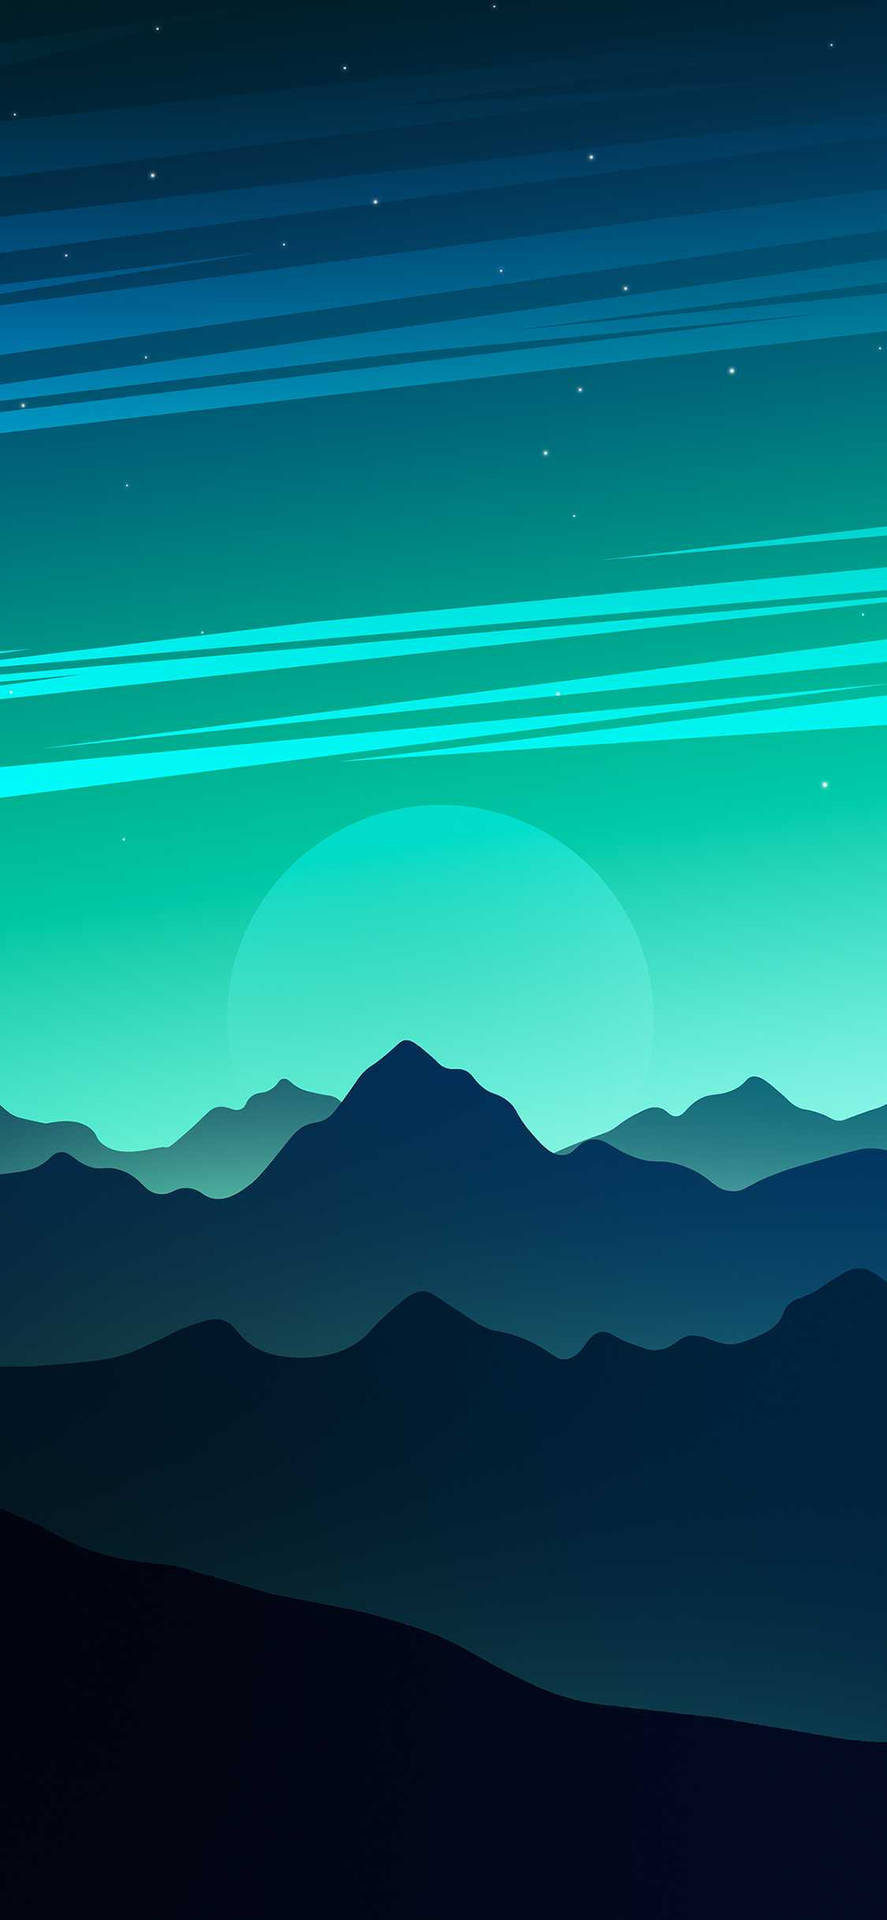 Teal Sky Over Mountains Ios 16 Background